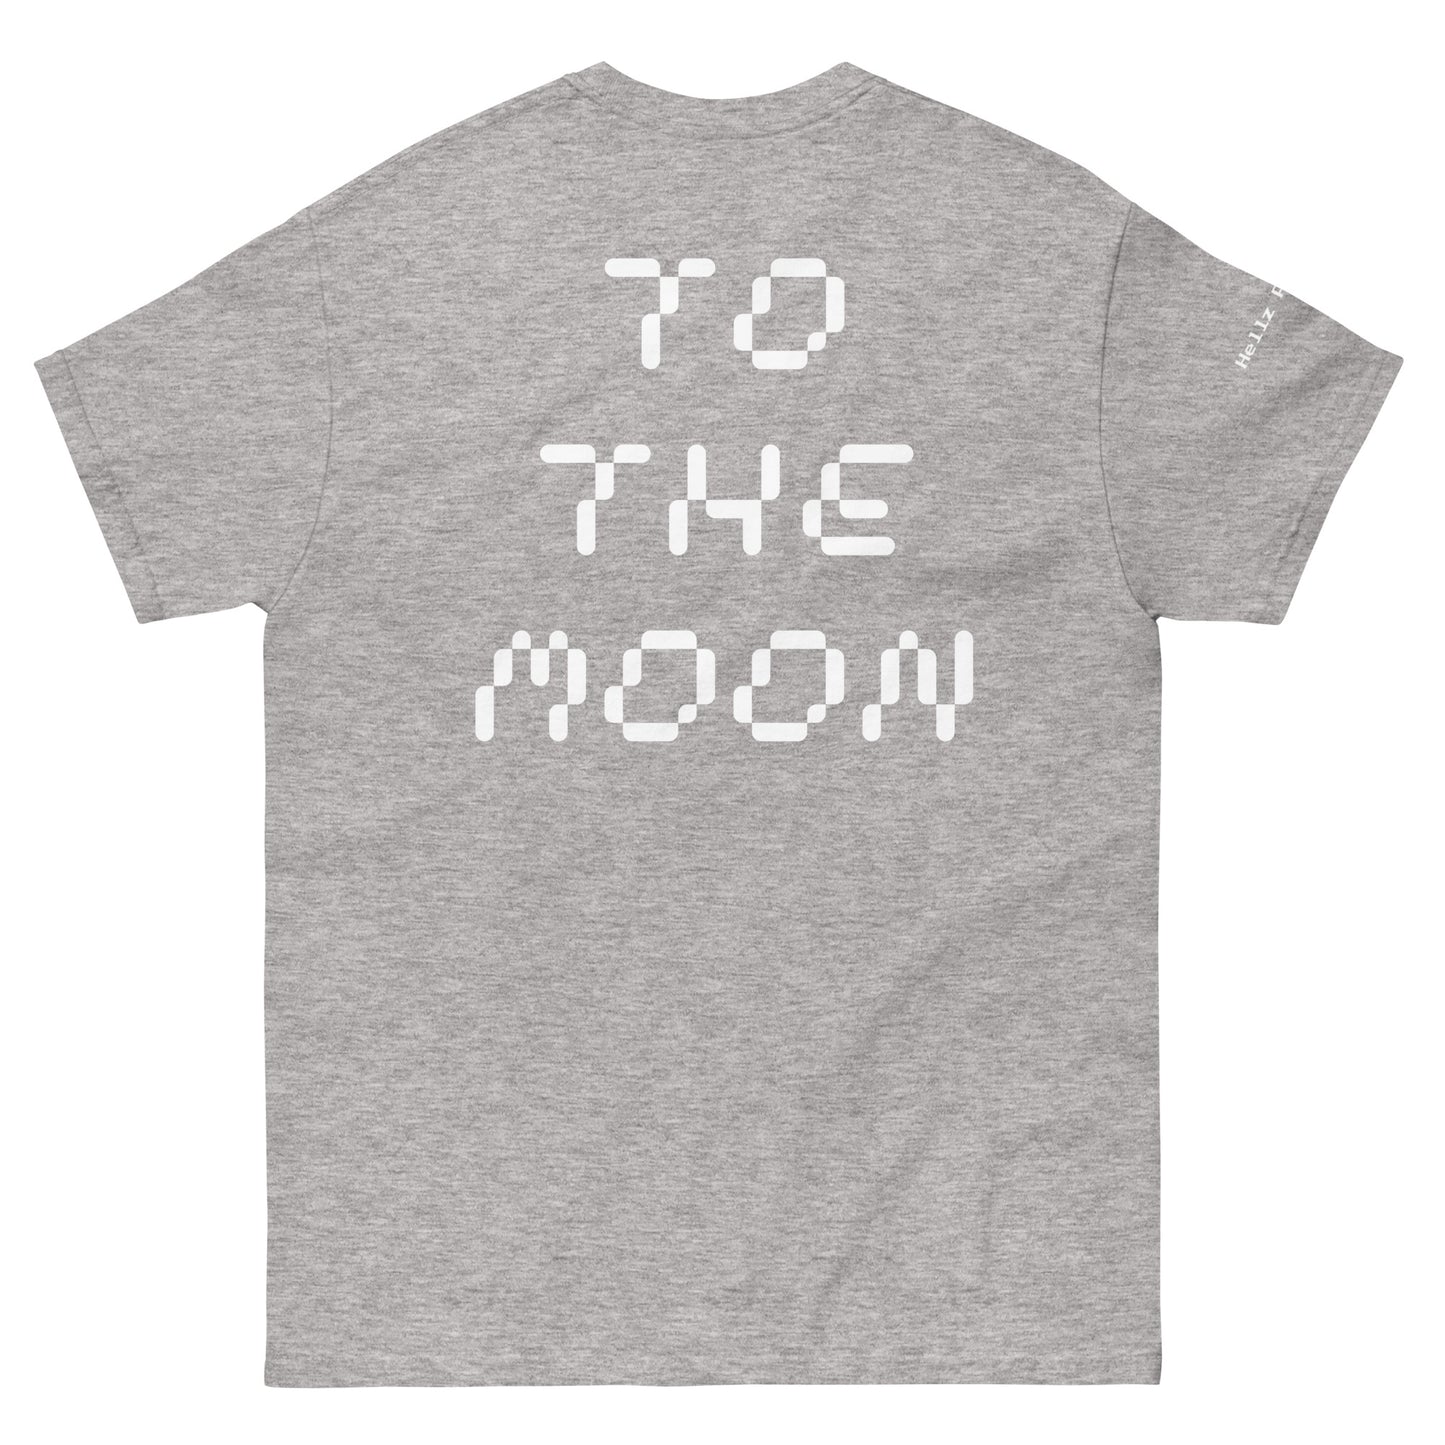 Hellz Palace® Brand To The Moon Men's tee